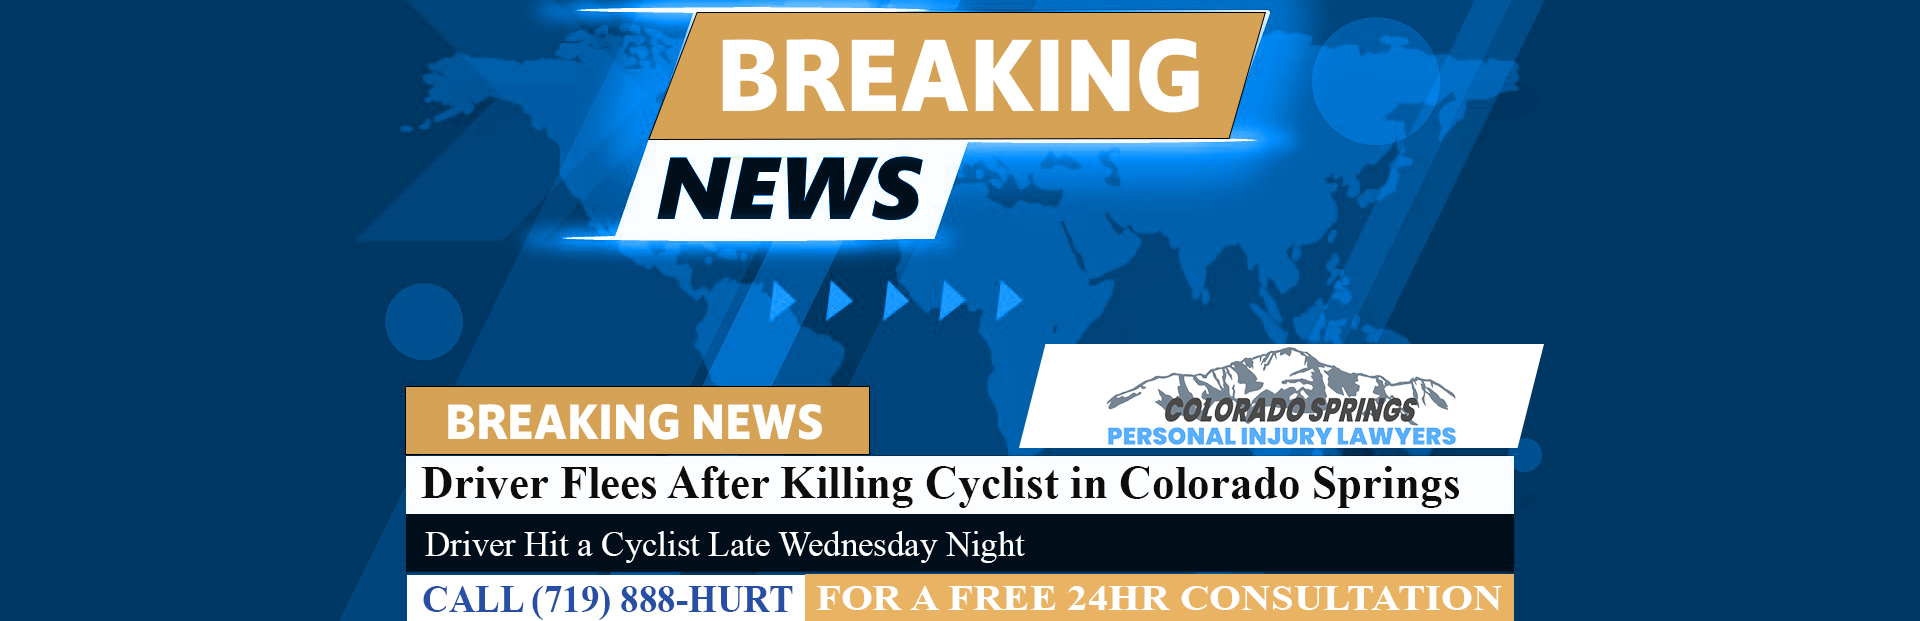 [09-09-23] Driver Flees After Killing Cyclist in Southeast Colorado Springs Crash